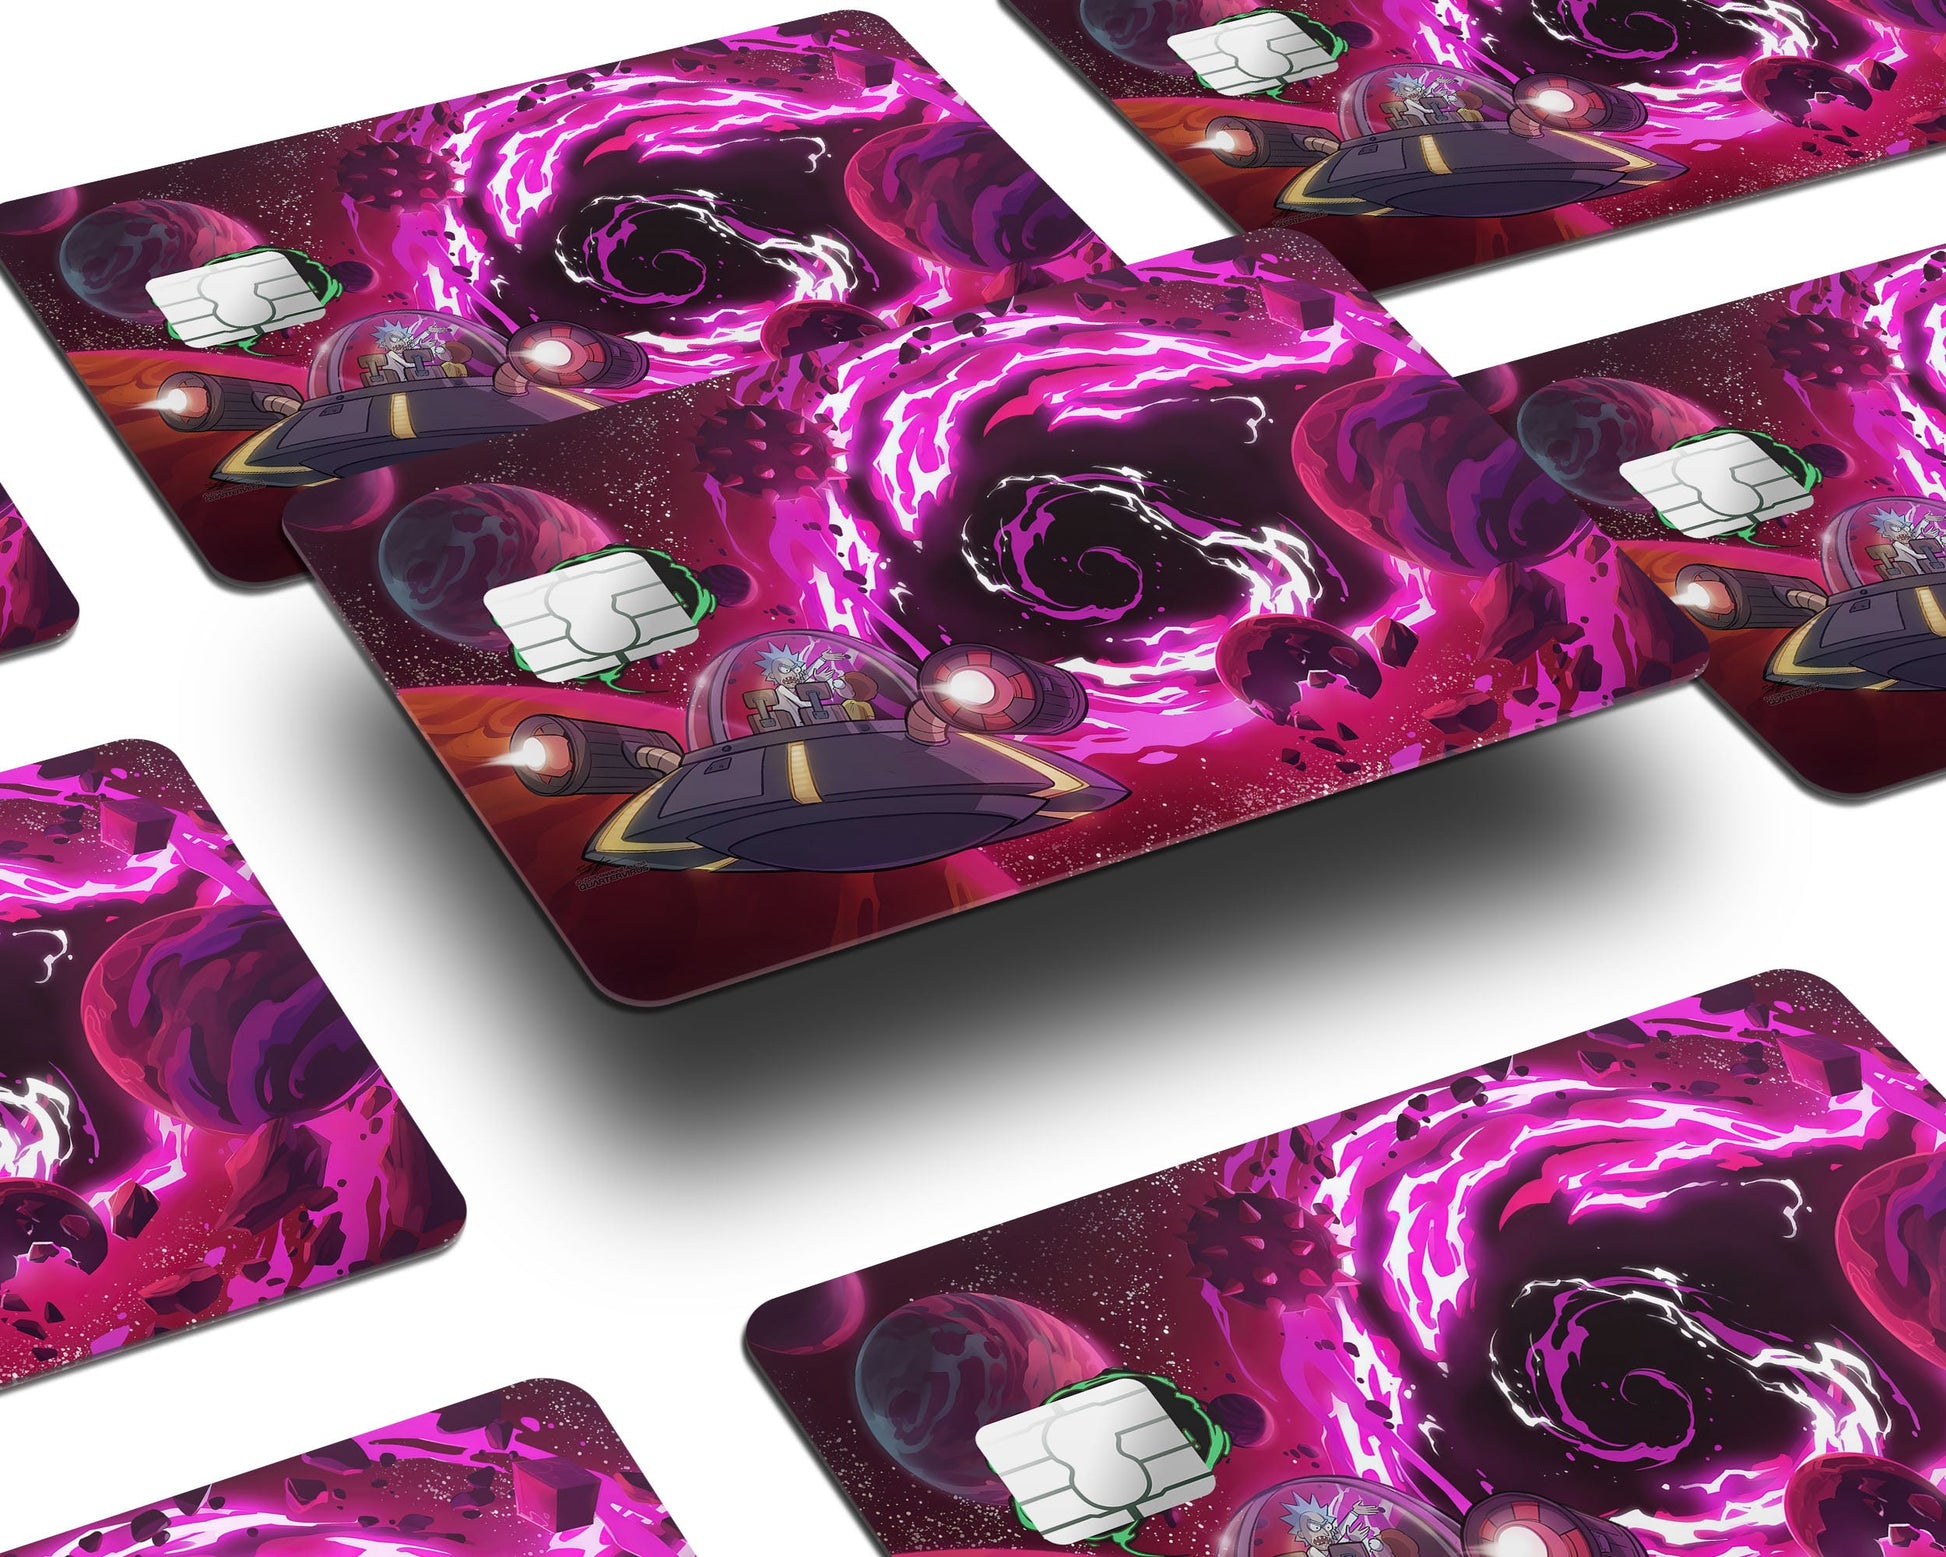 Anime Town Creations Credit Card Rick and Morty Space Travel Purple Window Skins - Anime Rick and Morty Credit Card Skin